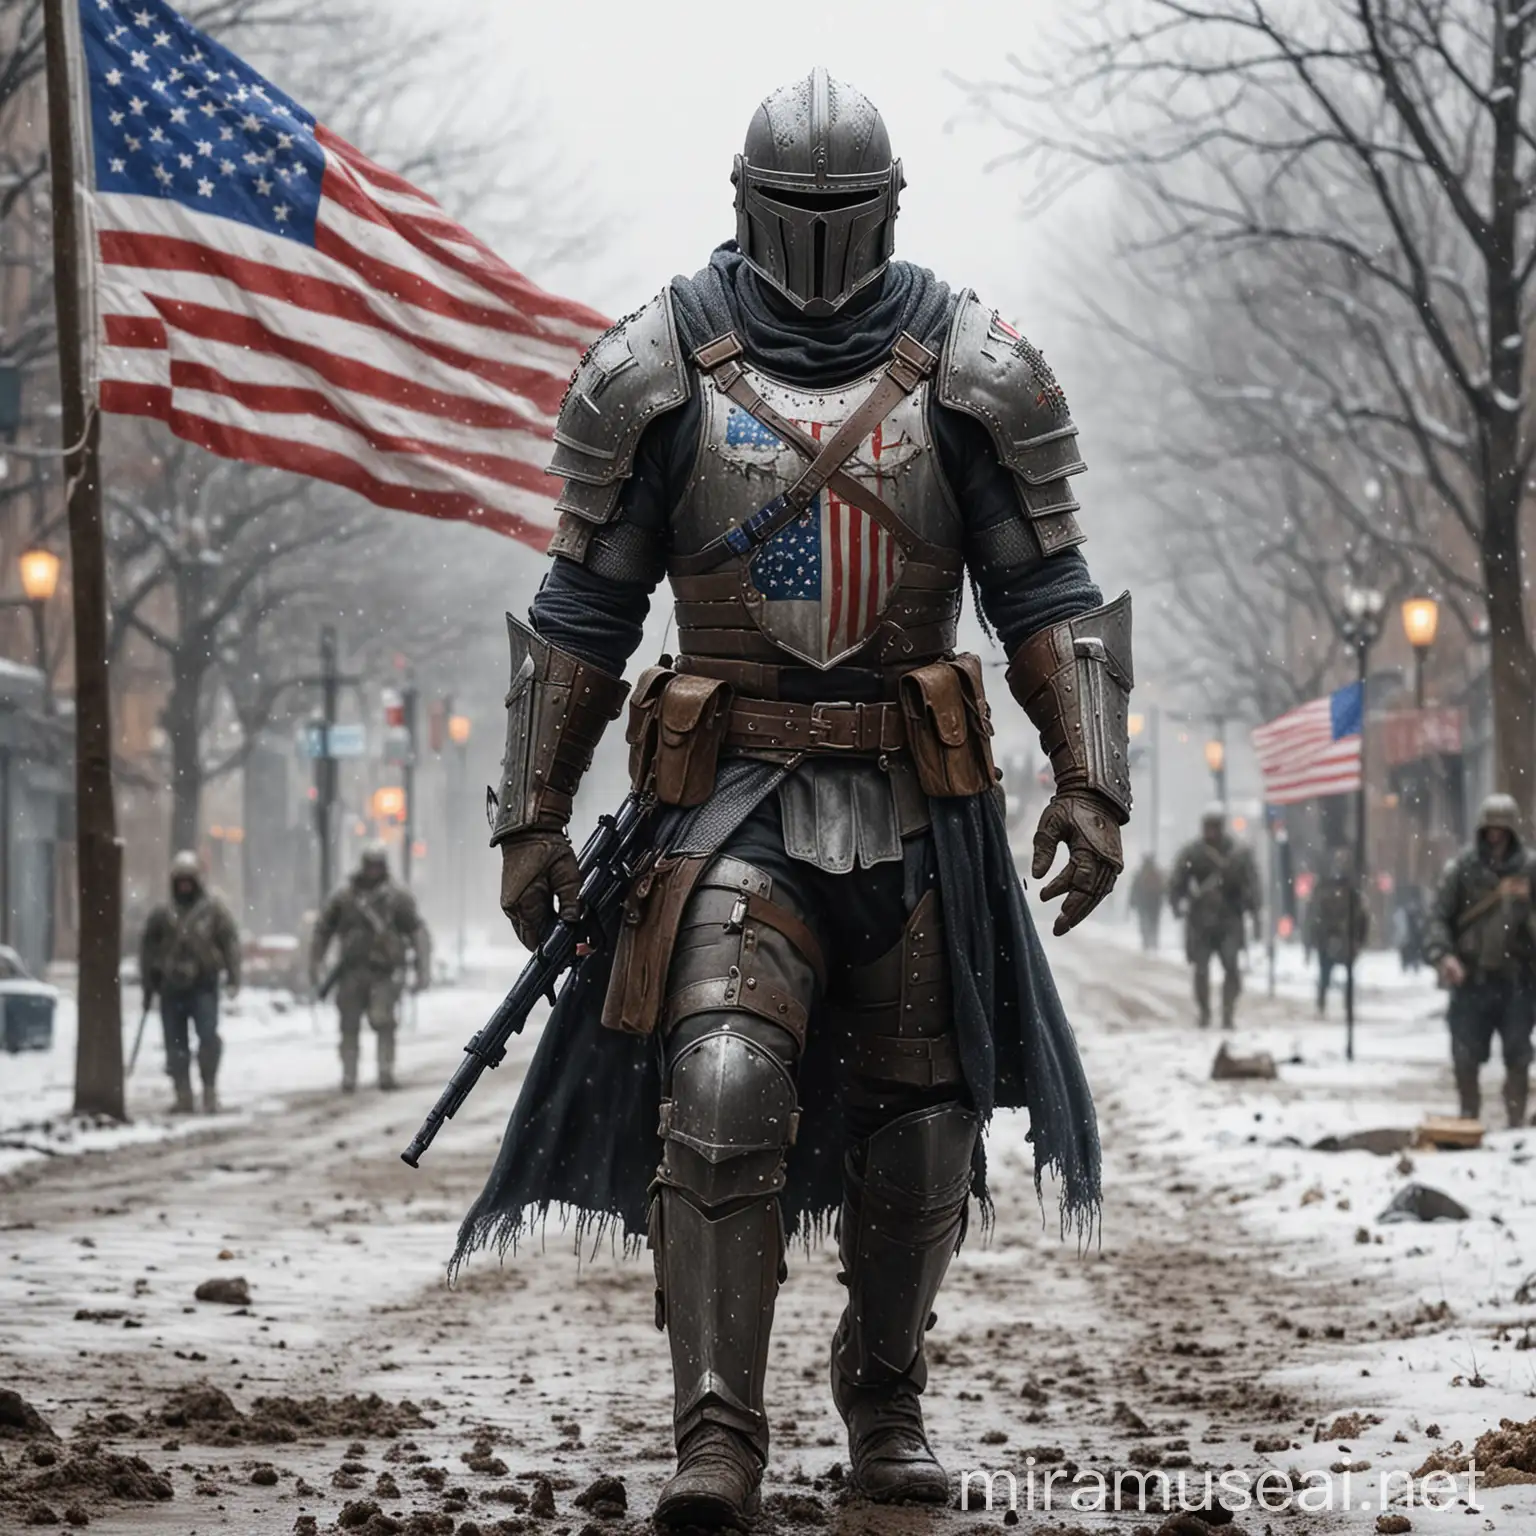 USA soldier as middle age  holy knight  in modern world. Add America flag colors to armor.Snowy weather,ground is mud.He has modern armor,knight helmet and gun .Realistic,detailed.Near  to city